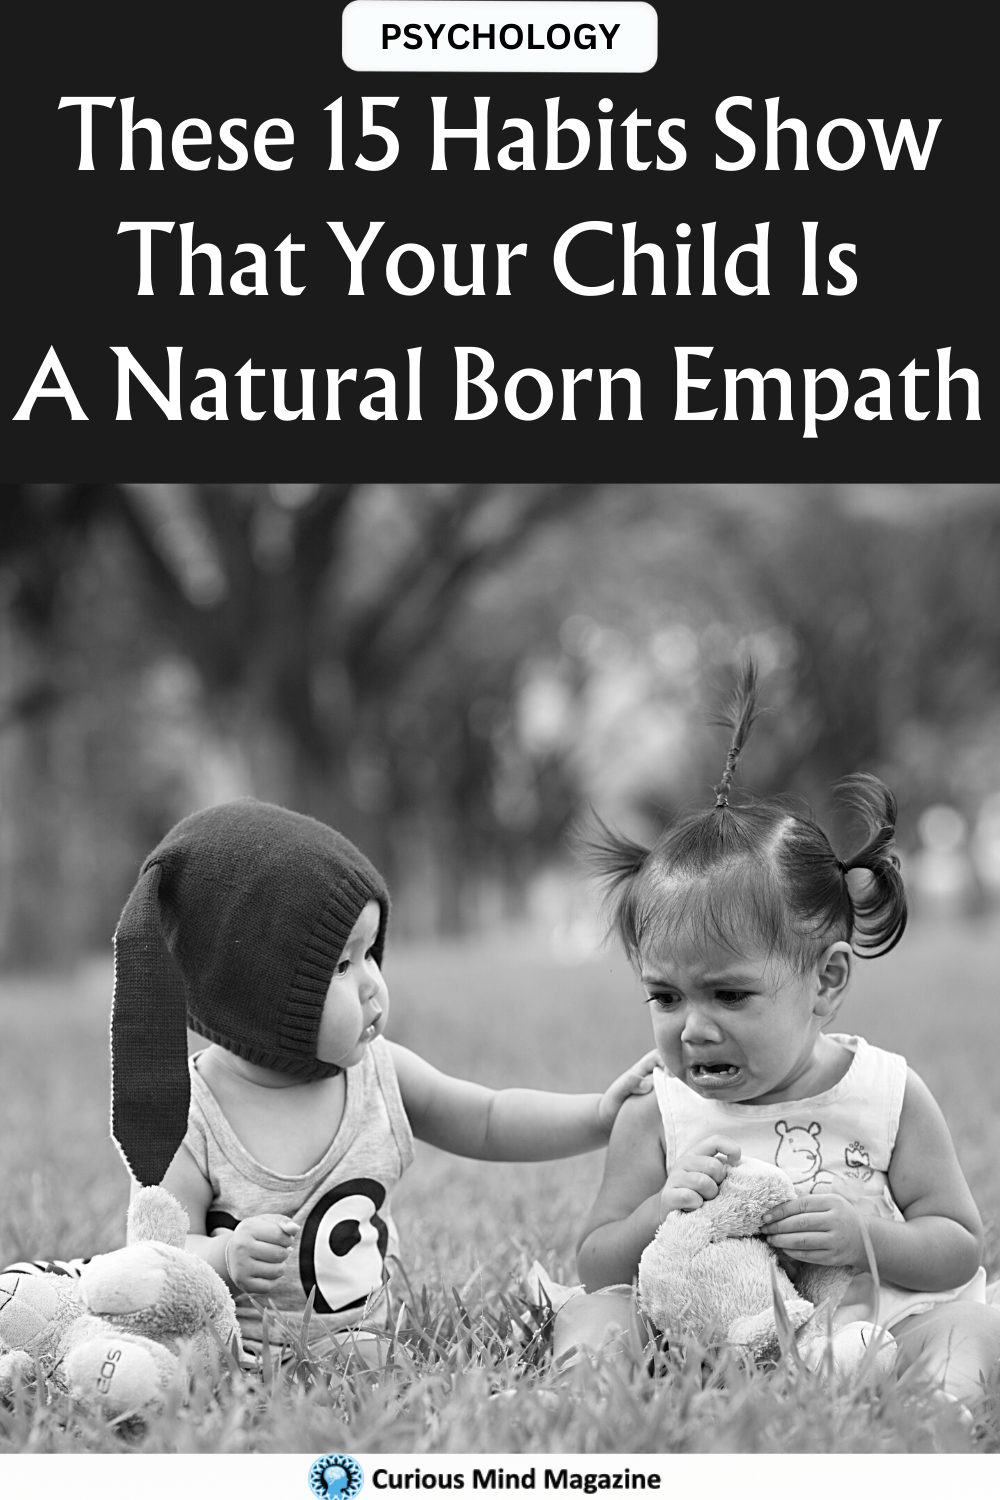 are empaths born or made